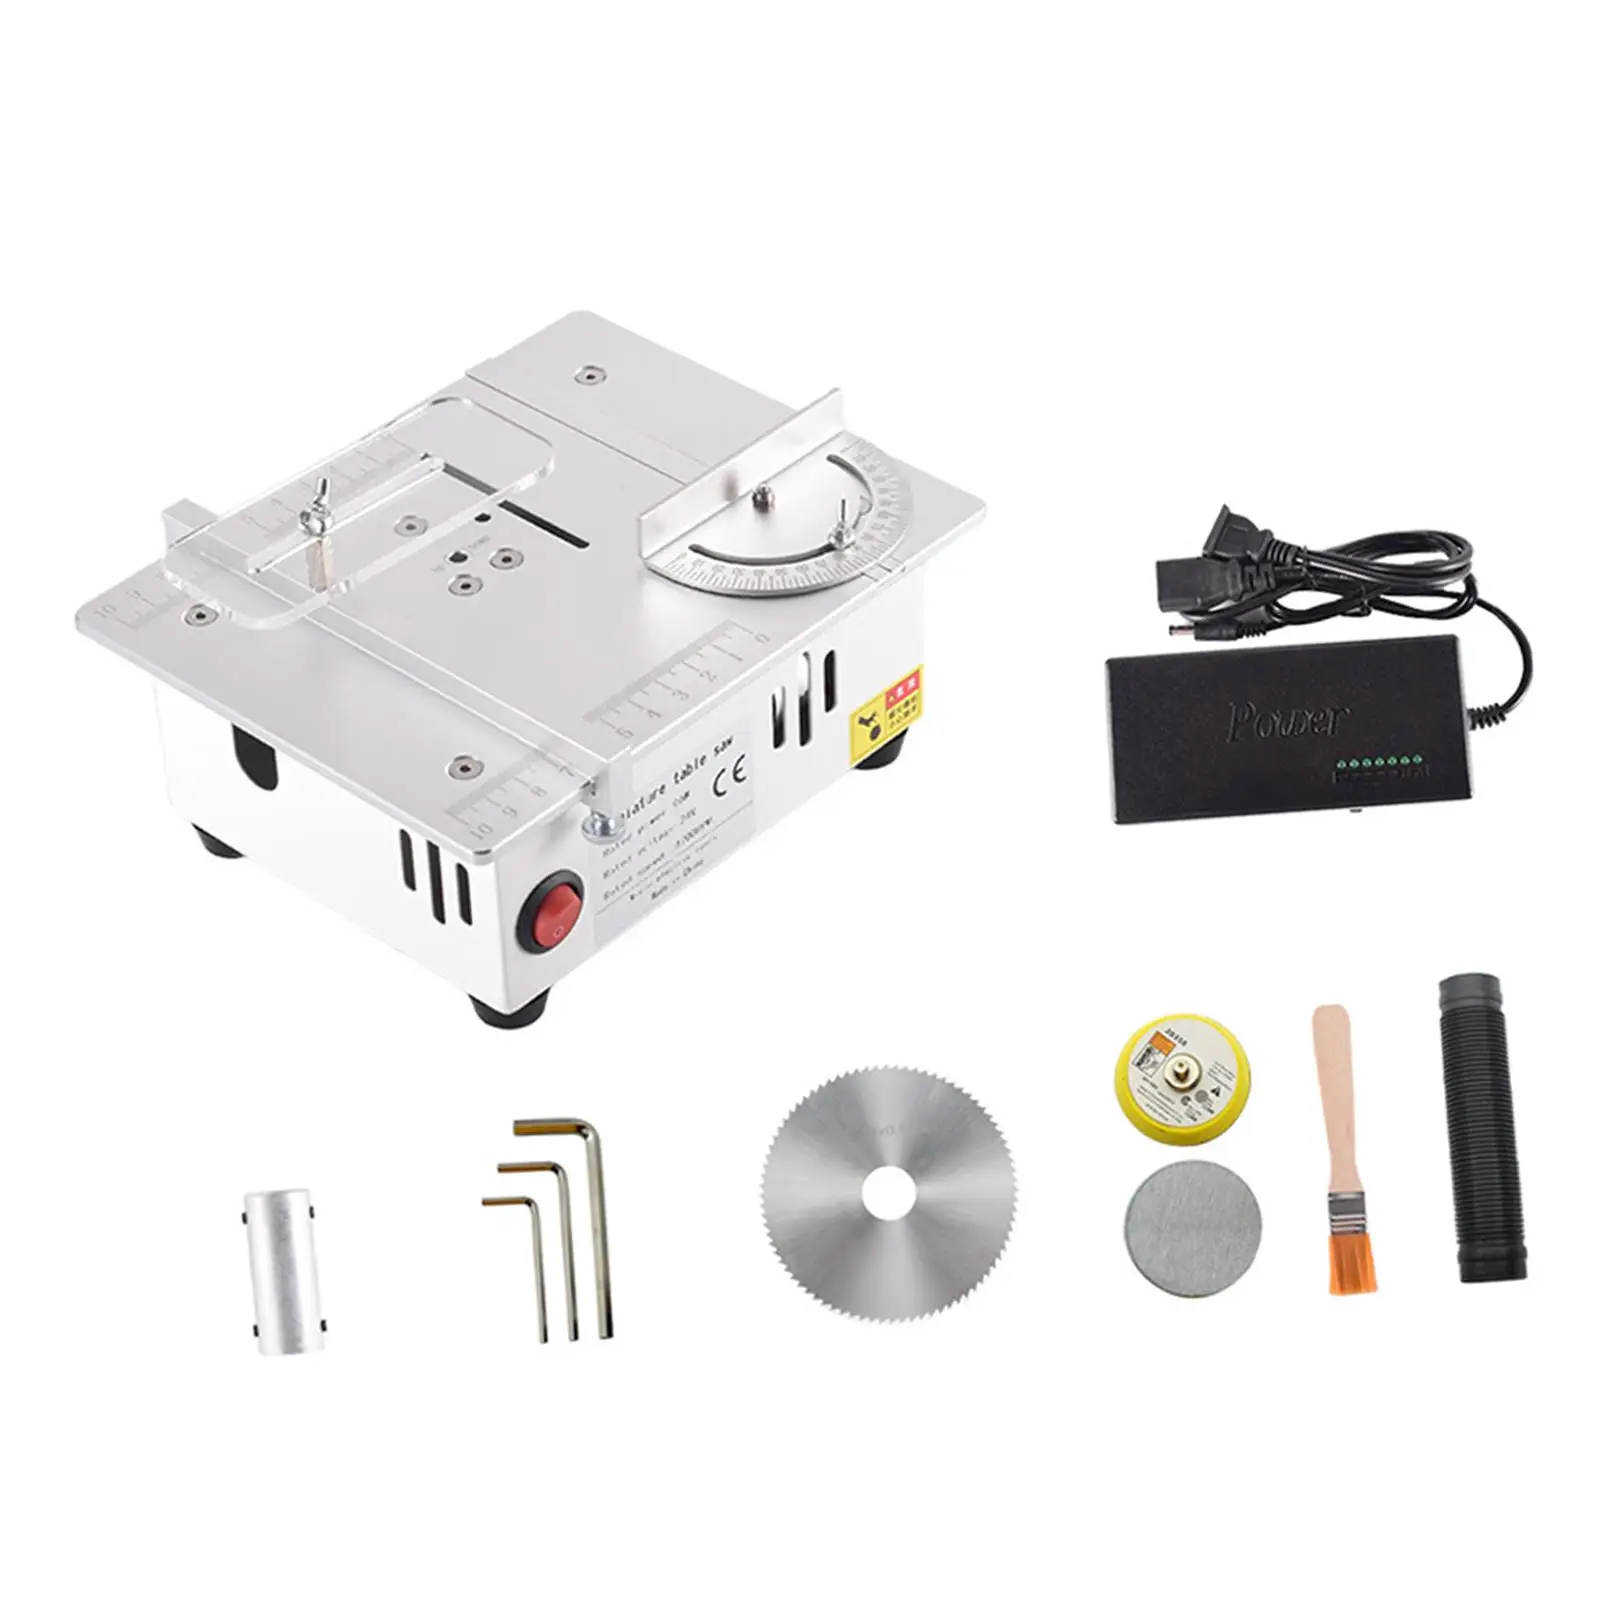 Mini Table Saw Household Small 7 Gear Adjustable Electric 96W Machine for Metal Hobbies Crafts Acrylic Cutting EU Adapter